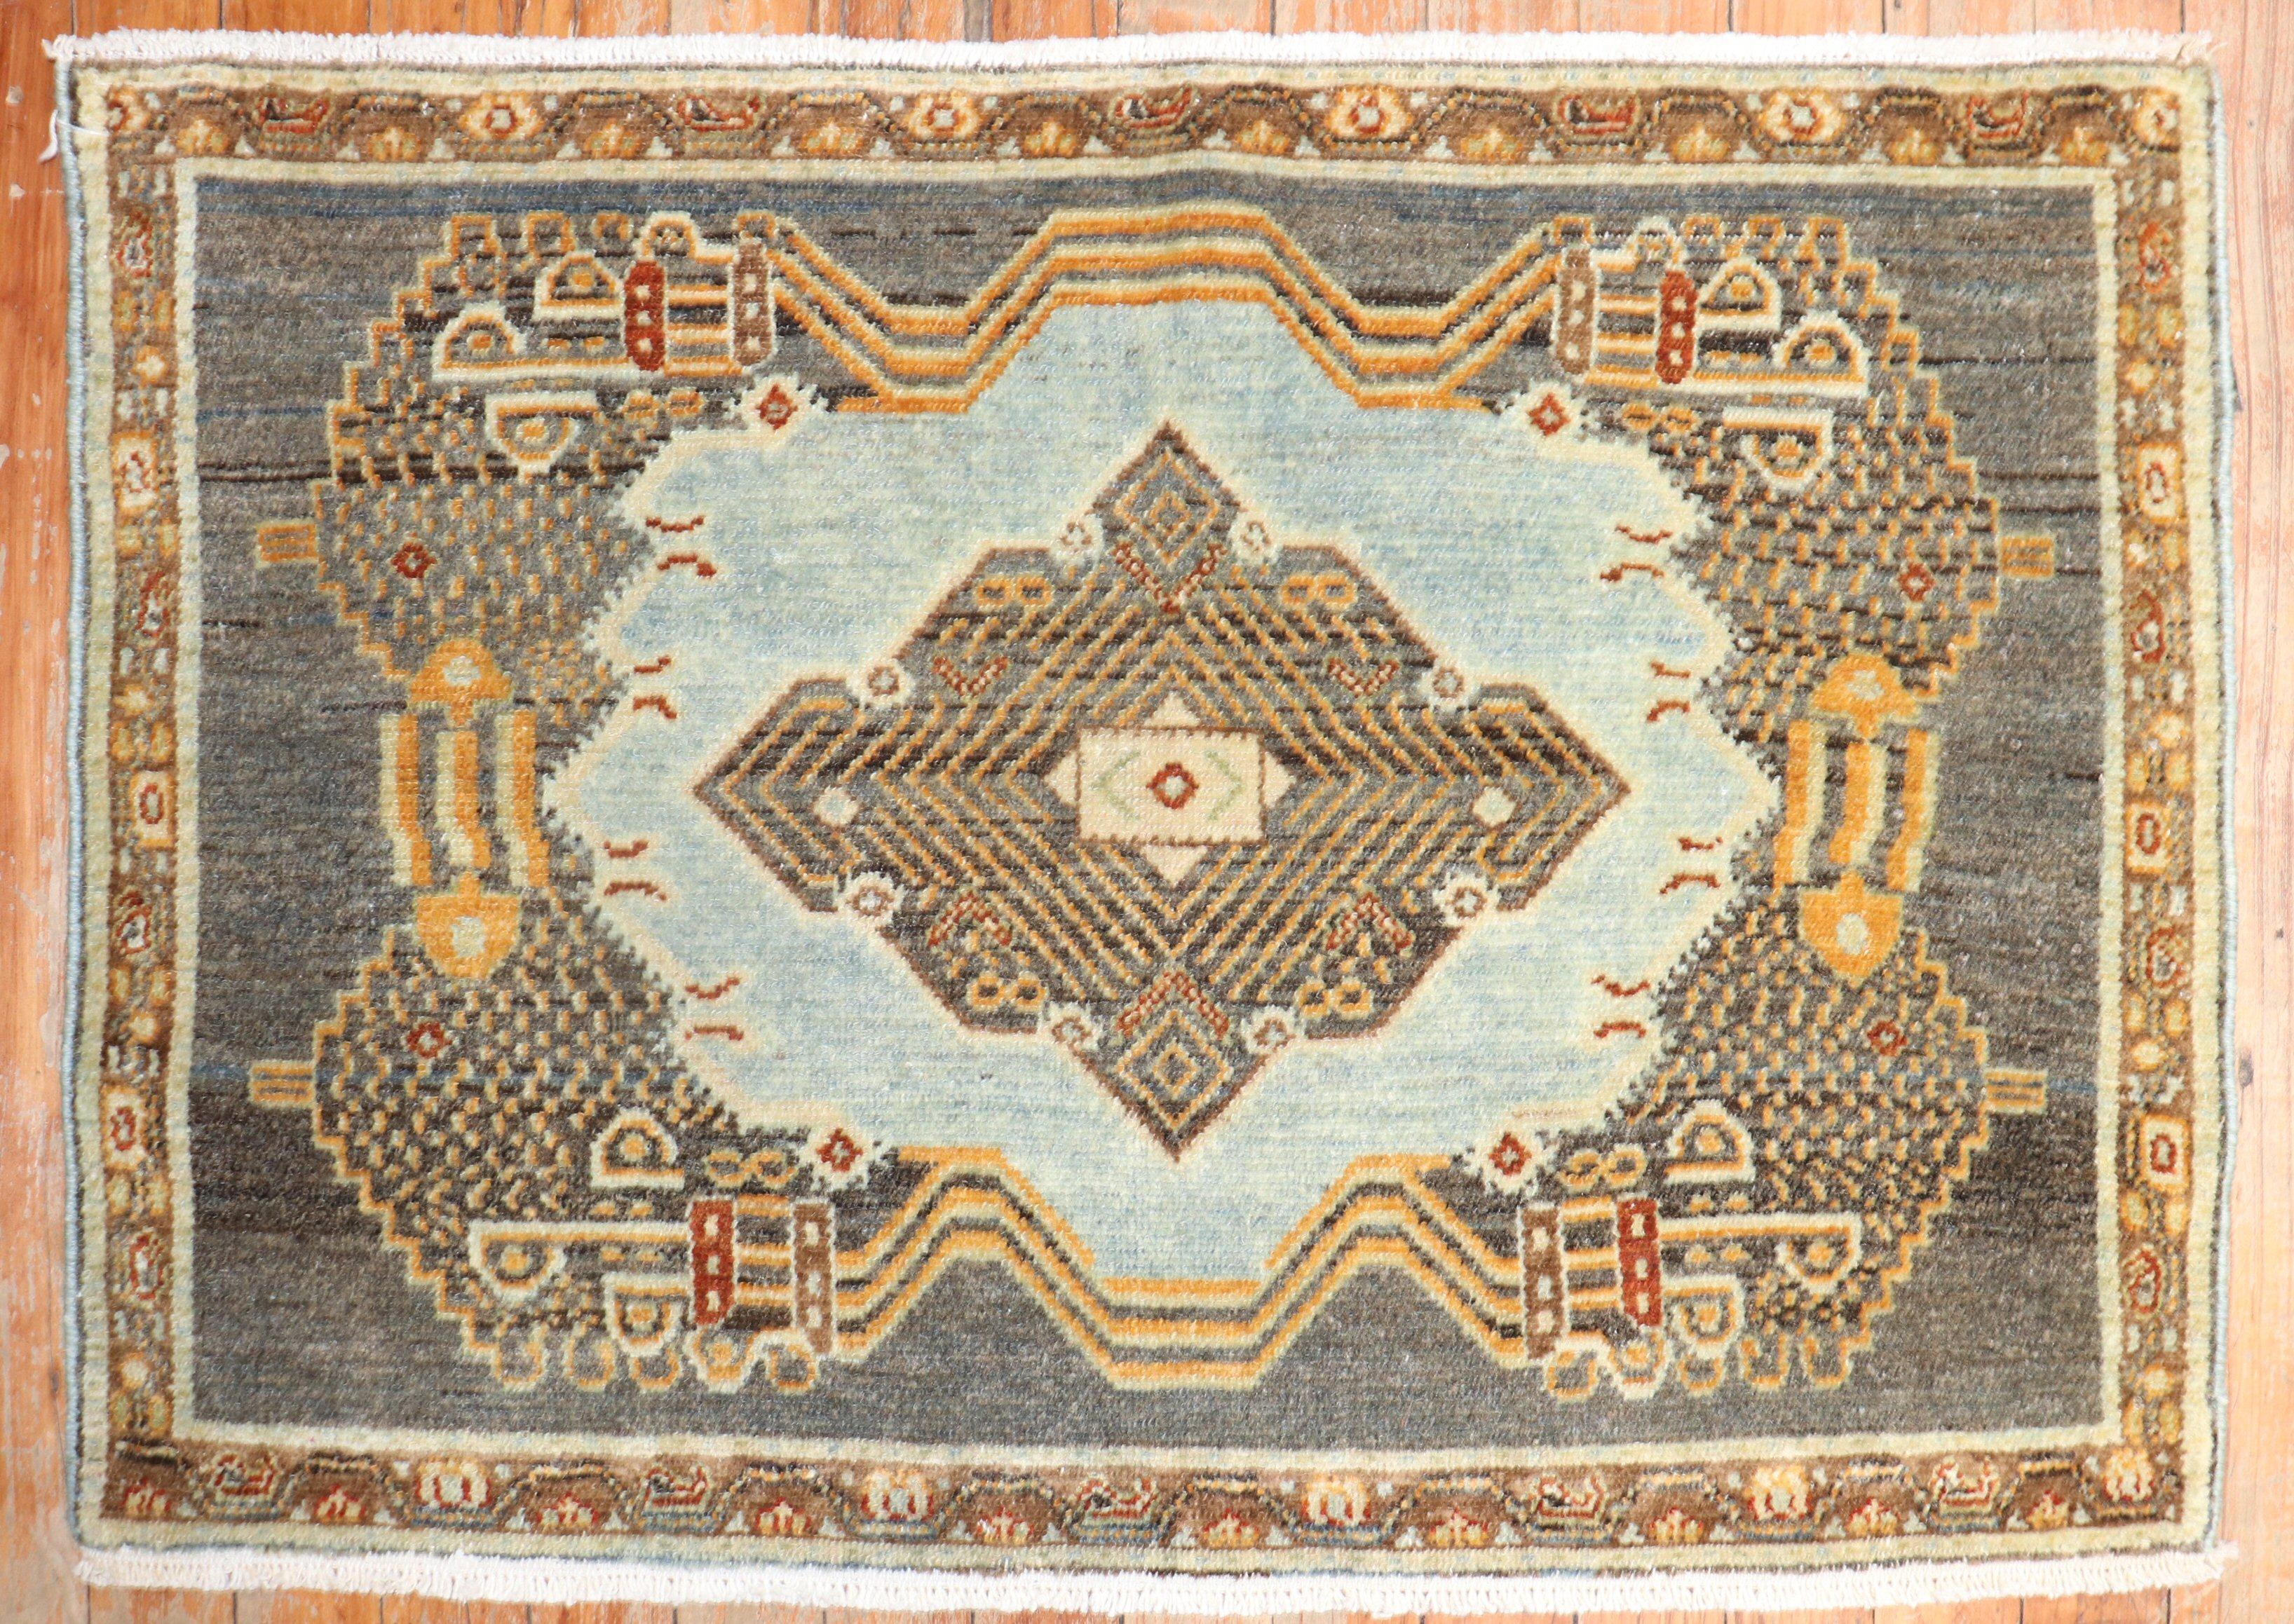 A fine antique Persian Senneh mini-size rug from the 1st quarter of the 20th century

Measure: 1'11'' x 2'8'' circa 1920


Antique Senneh rugs are one of the most distinctive of all Persian rugs, even though the designs are often similar to